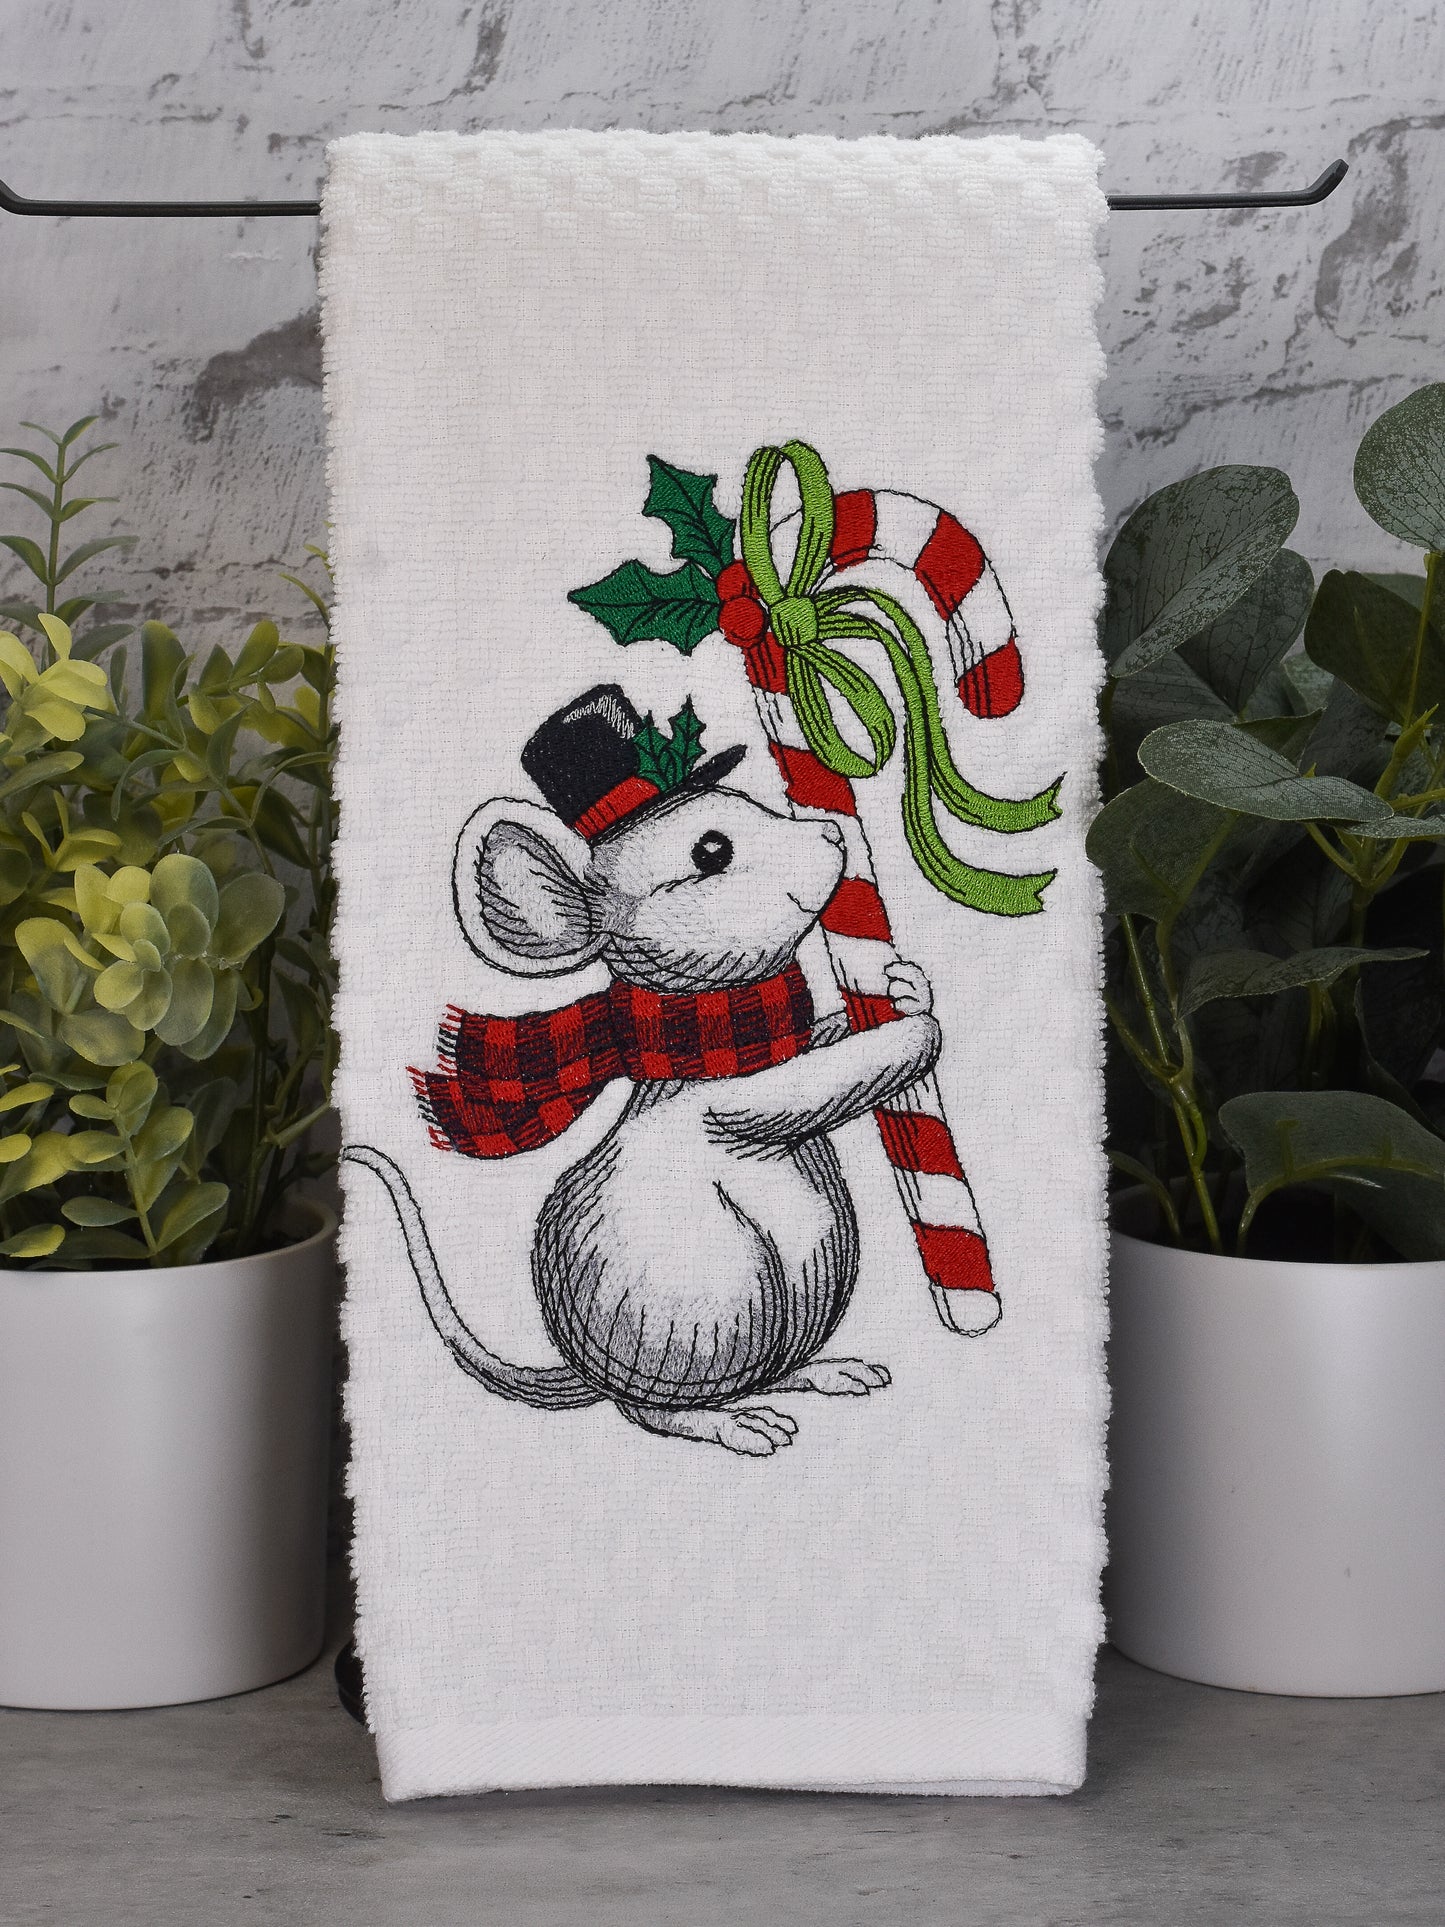 Mouse Candy Cane Towel - Embroidered Christmas Design